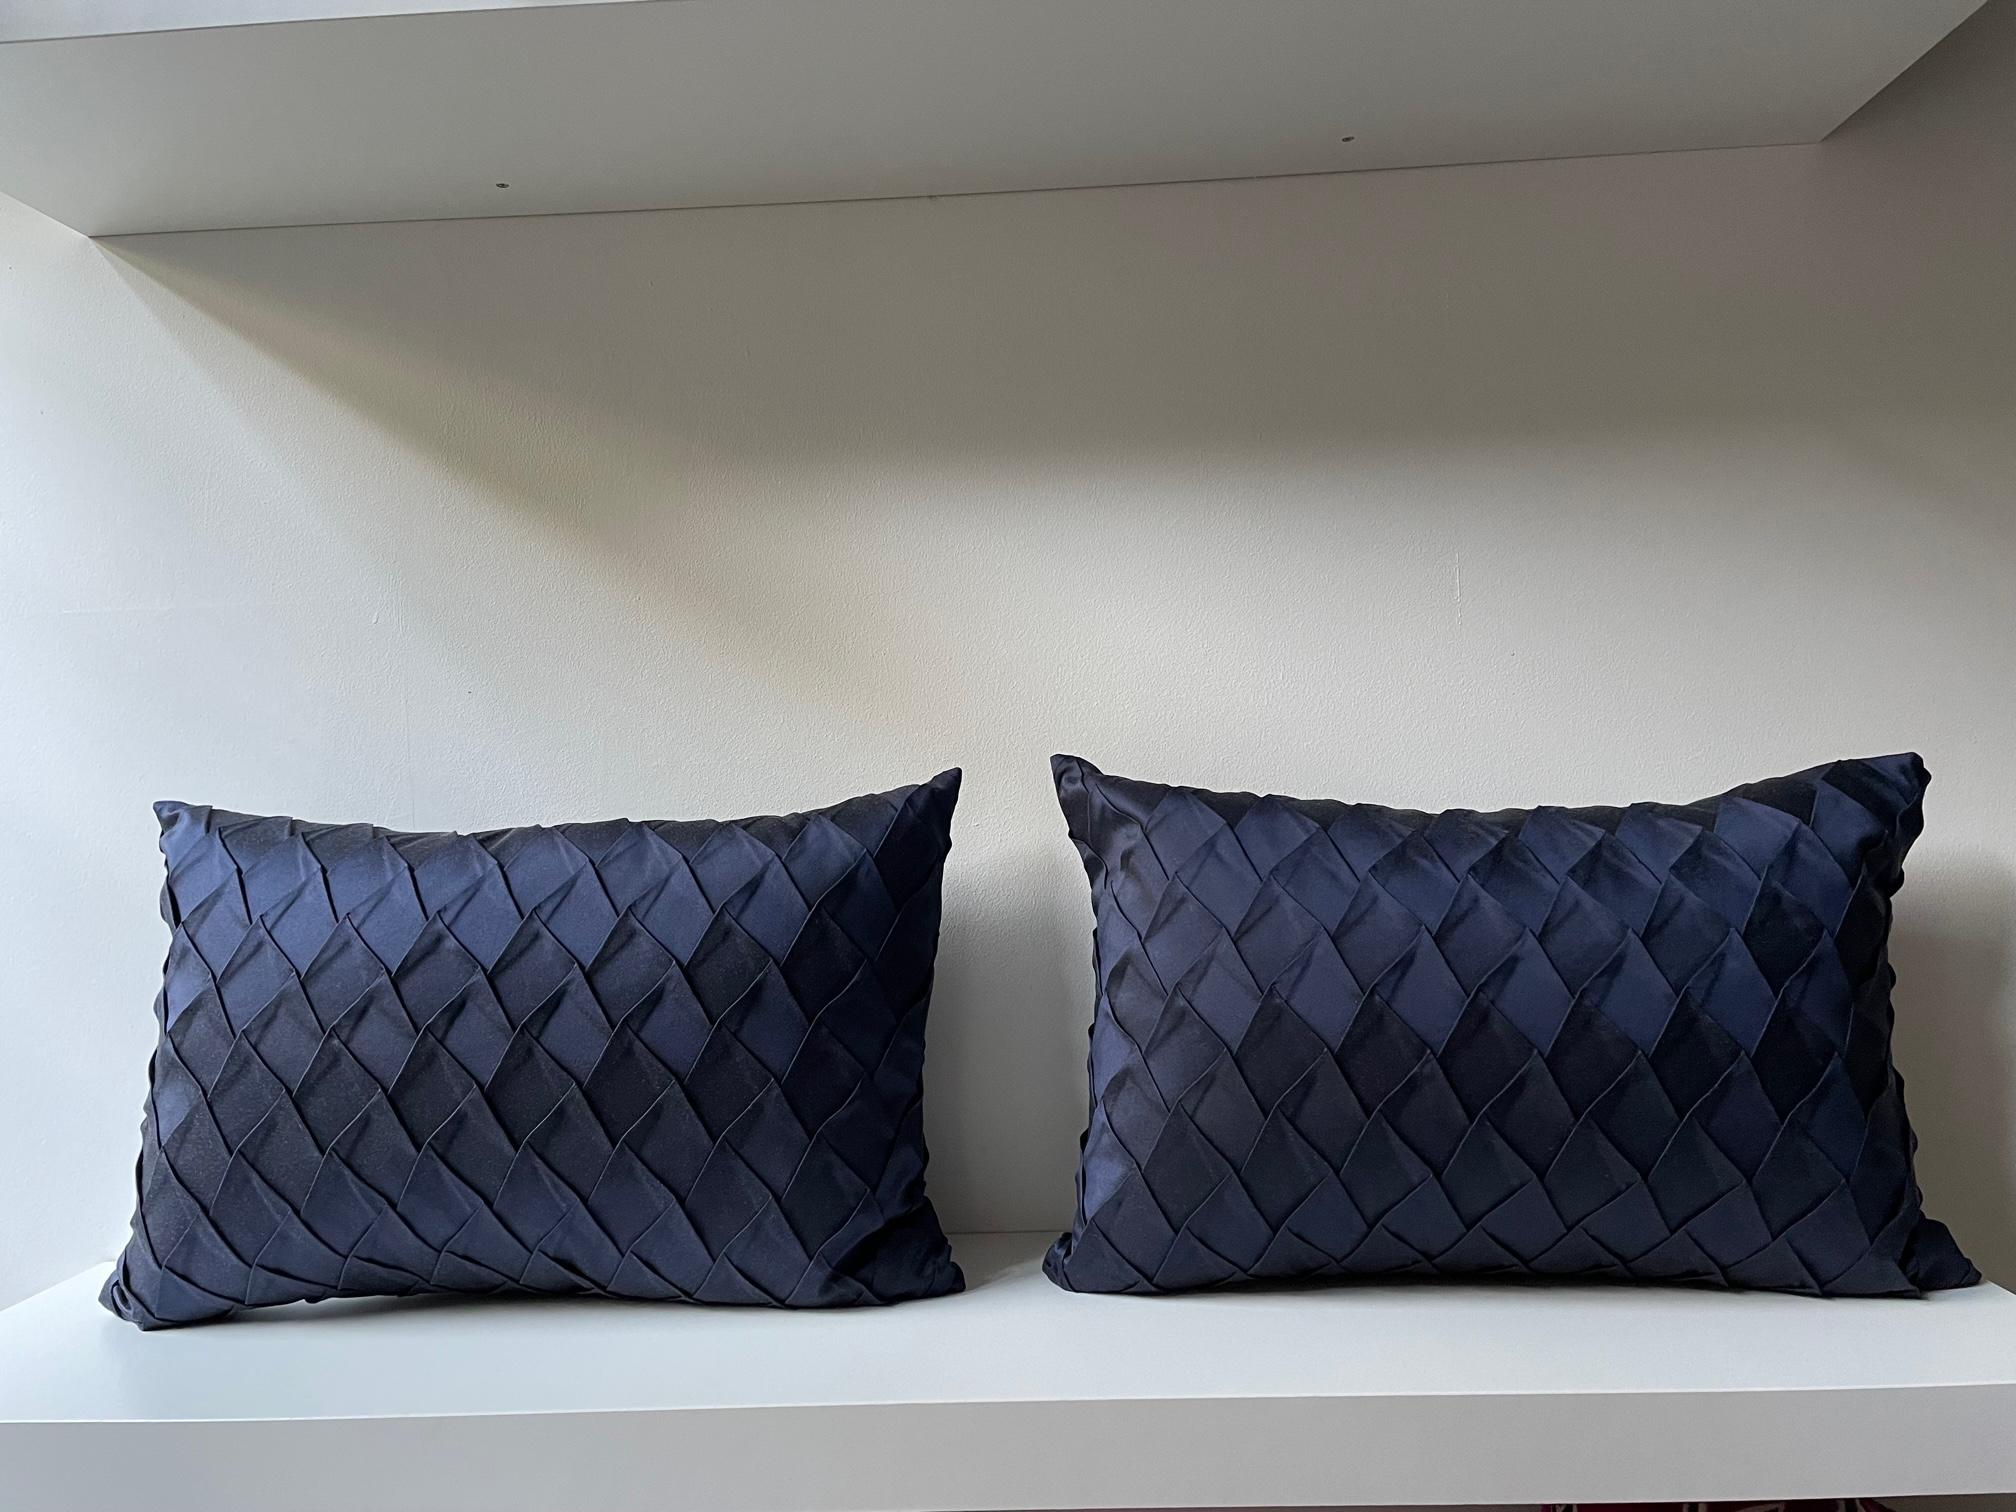 One pair silk cushions with embossed front panel in steam pleated opal pattern, handwoven silk Bruno Triplet color dark blue / bewitched, back panel silk satin color dark blue, cushion size 55 x 55cm, concealed zipper in the bottom seam, inner pad